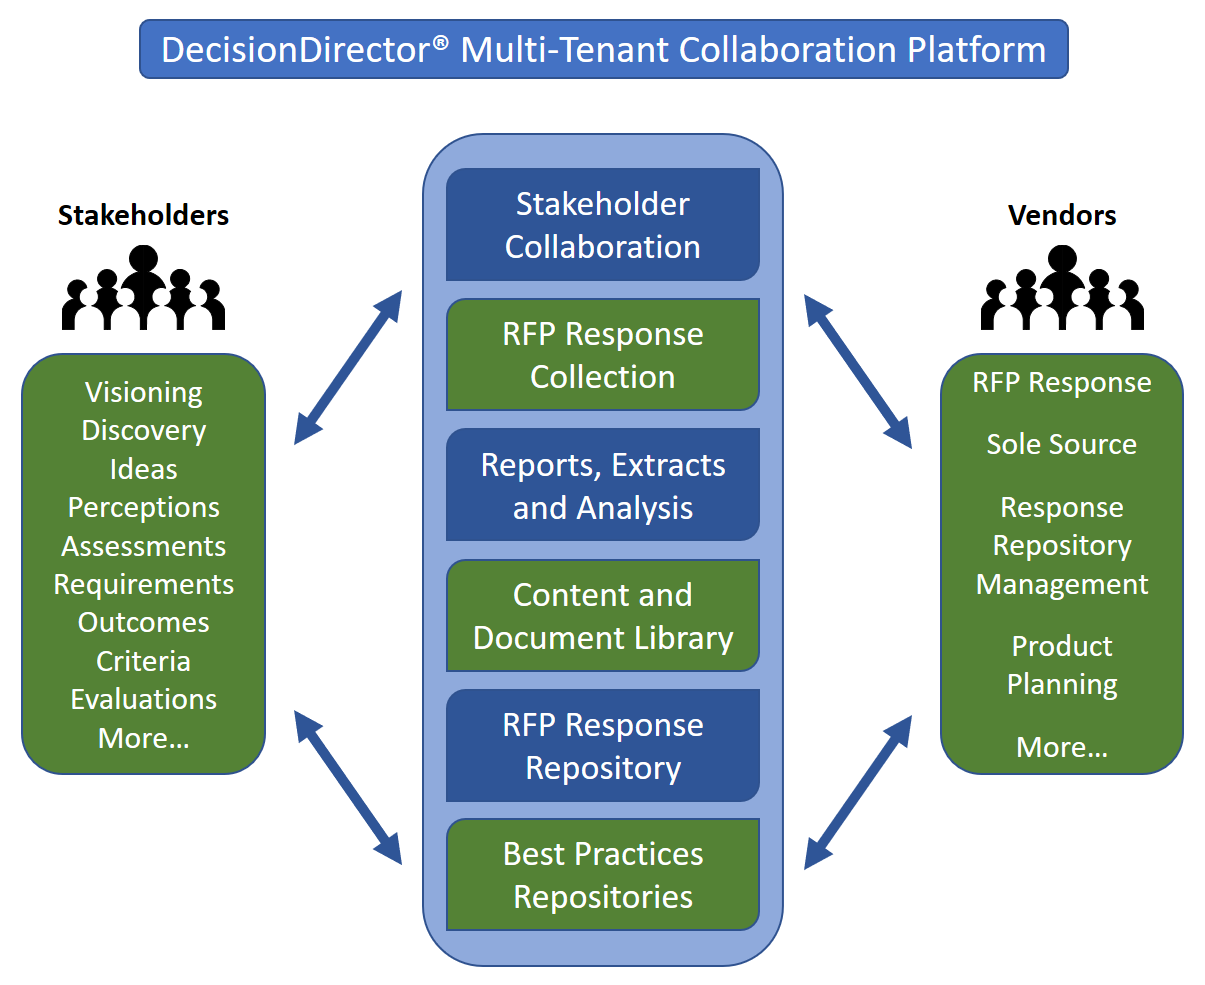 DecisionDirector supports the lifecycle of enterprise software selection for buyers and vendors